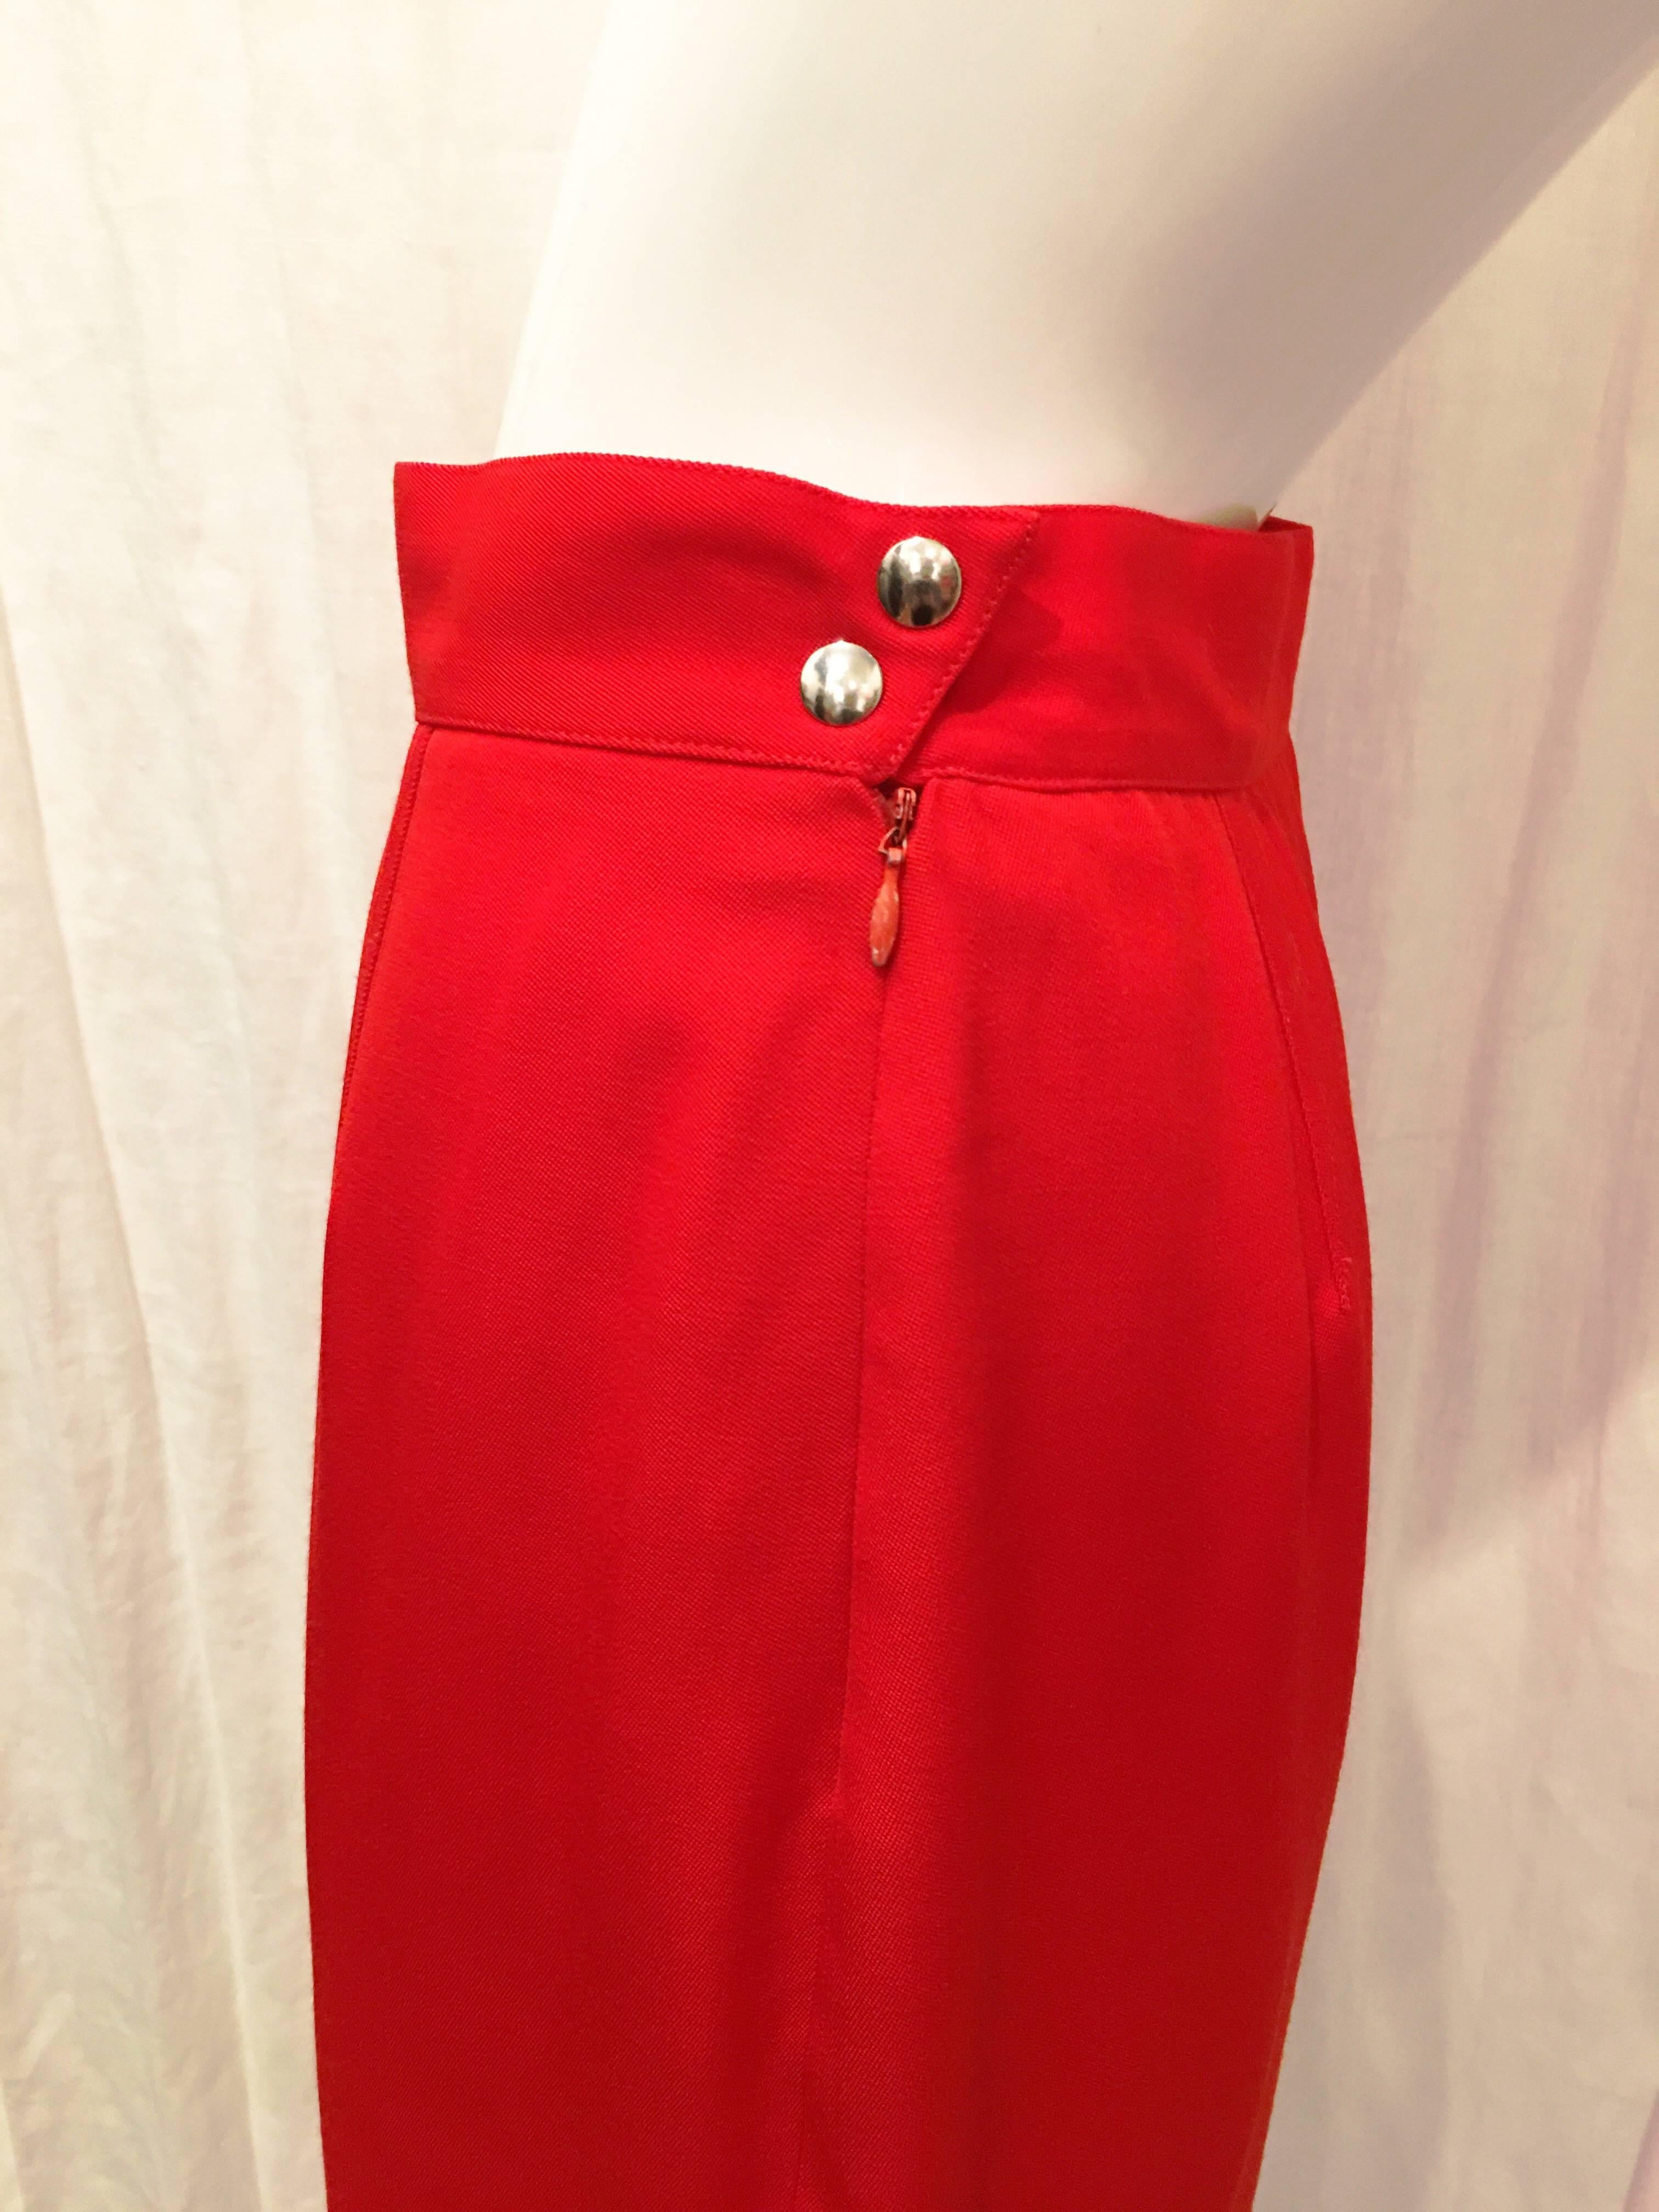 Women's or Men's Thierry Mugler Red Suit Skirt  For Sale